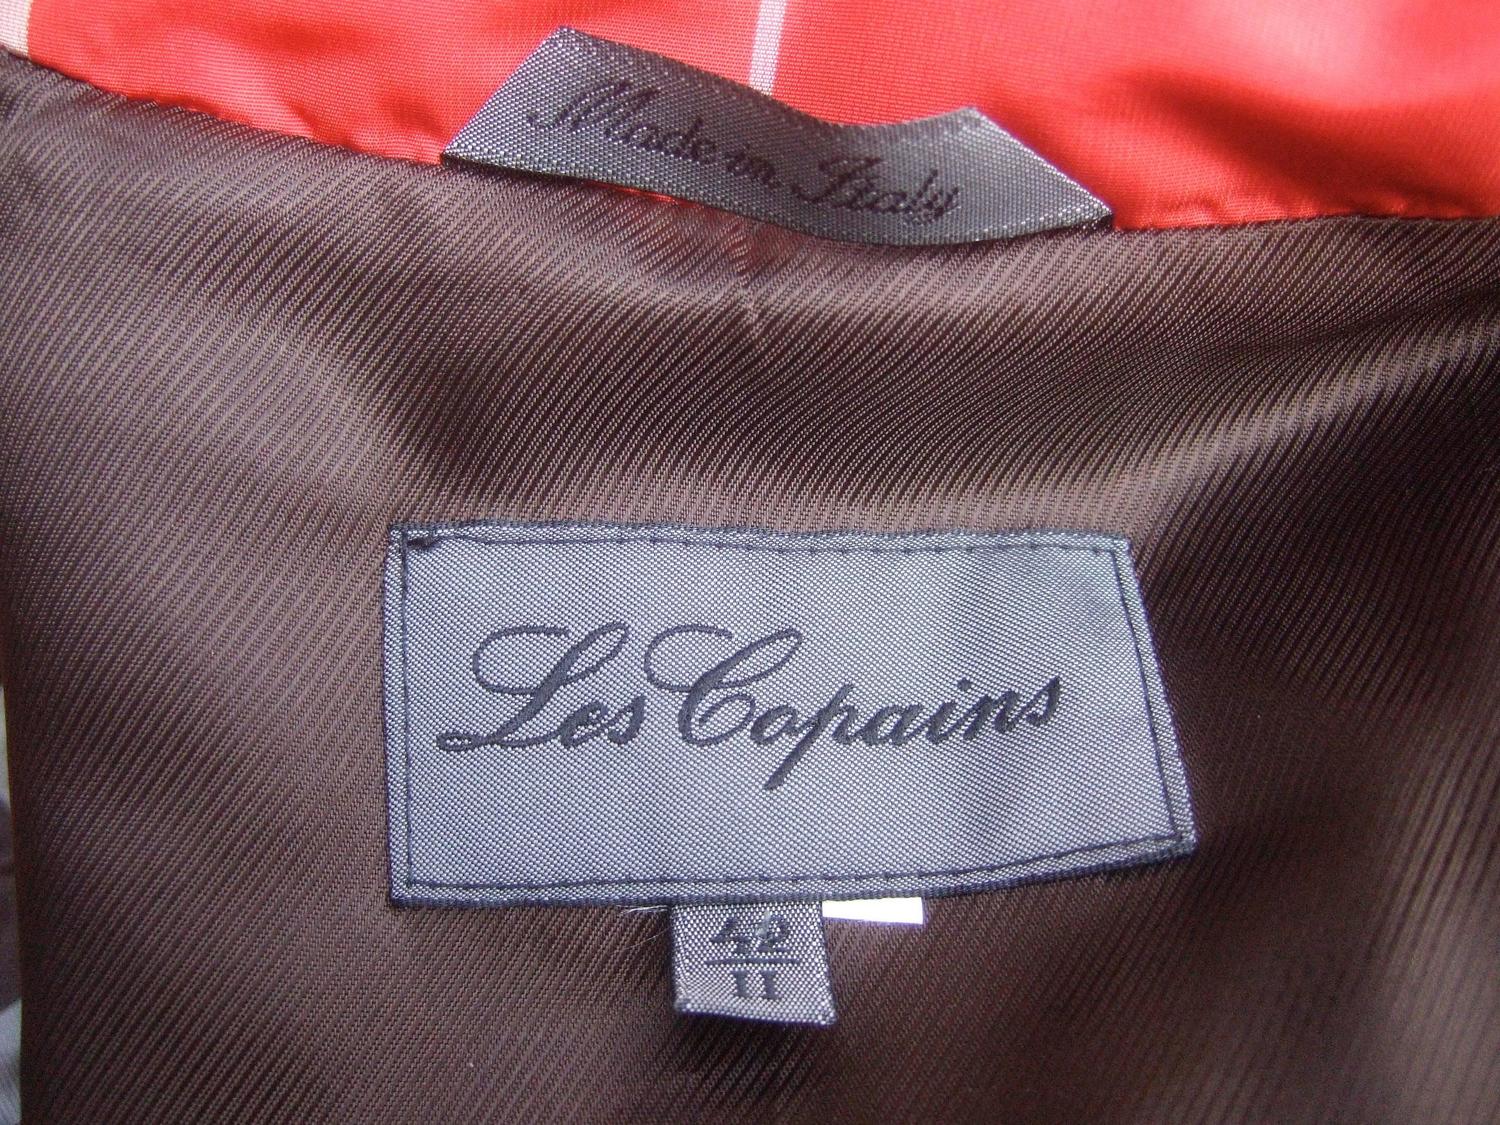 Les Copains Plaid Belted Trench Coat Made in Italy Size 42 at 1stdibs